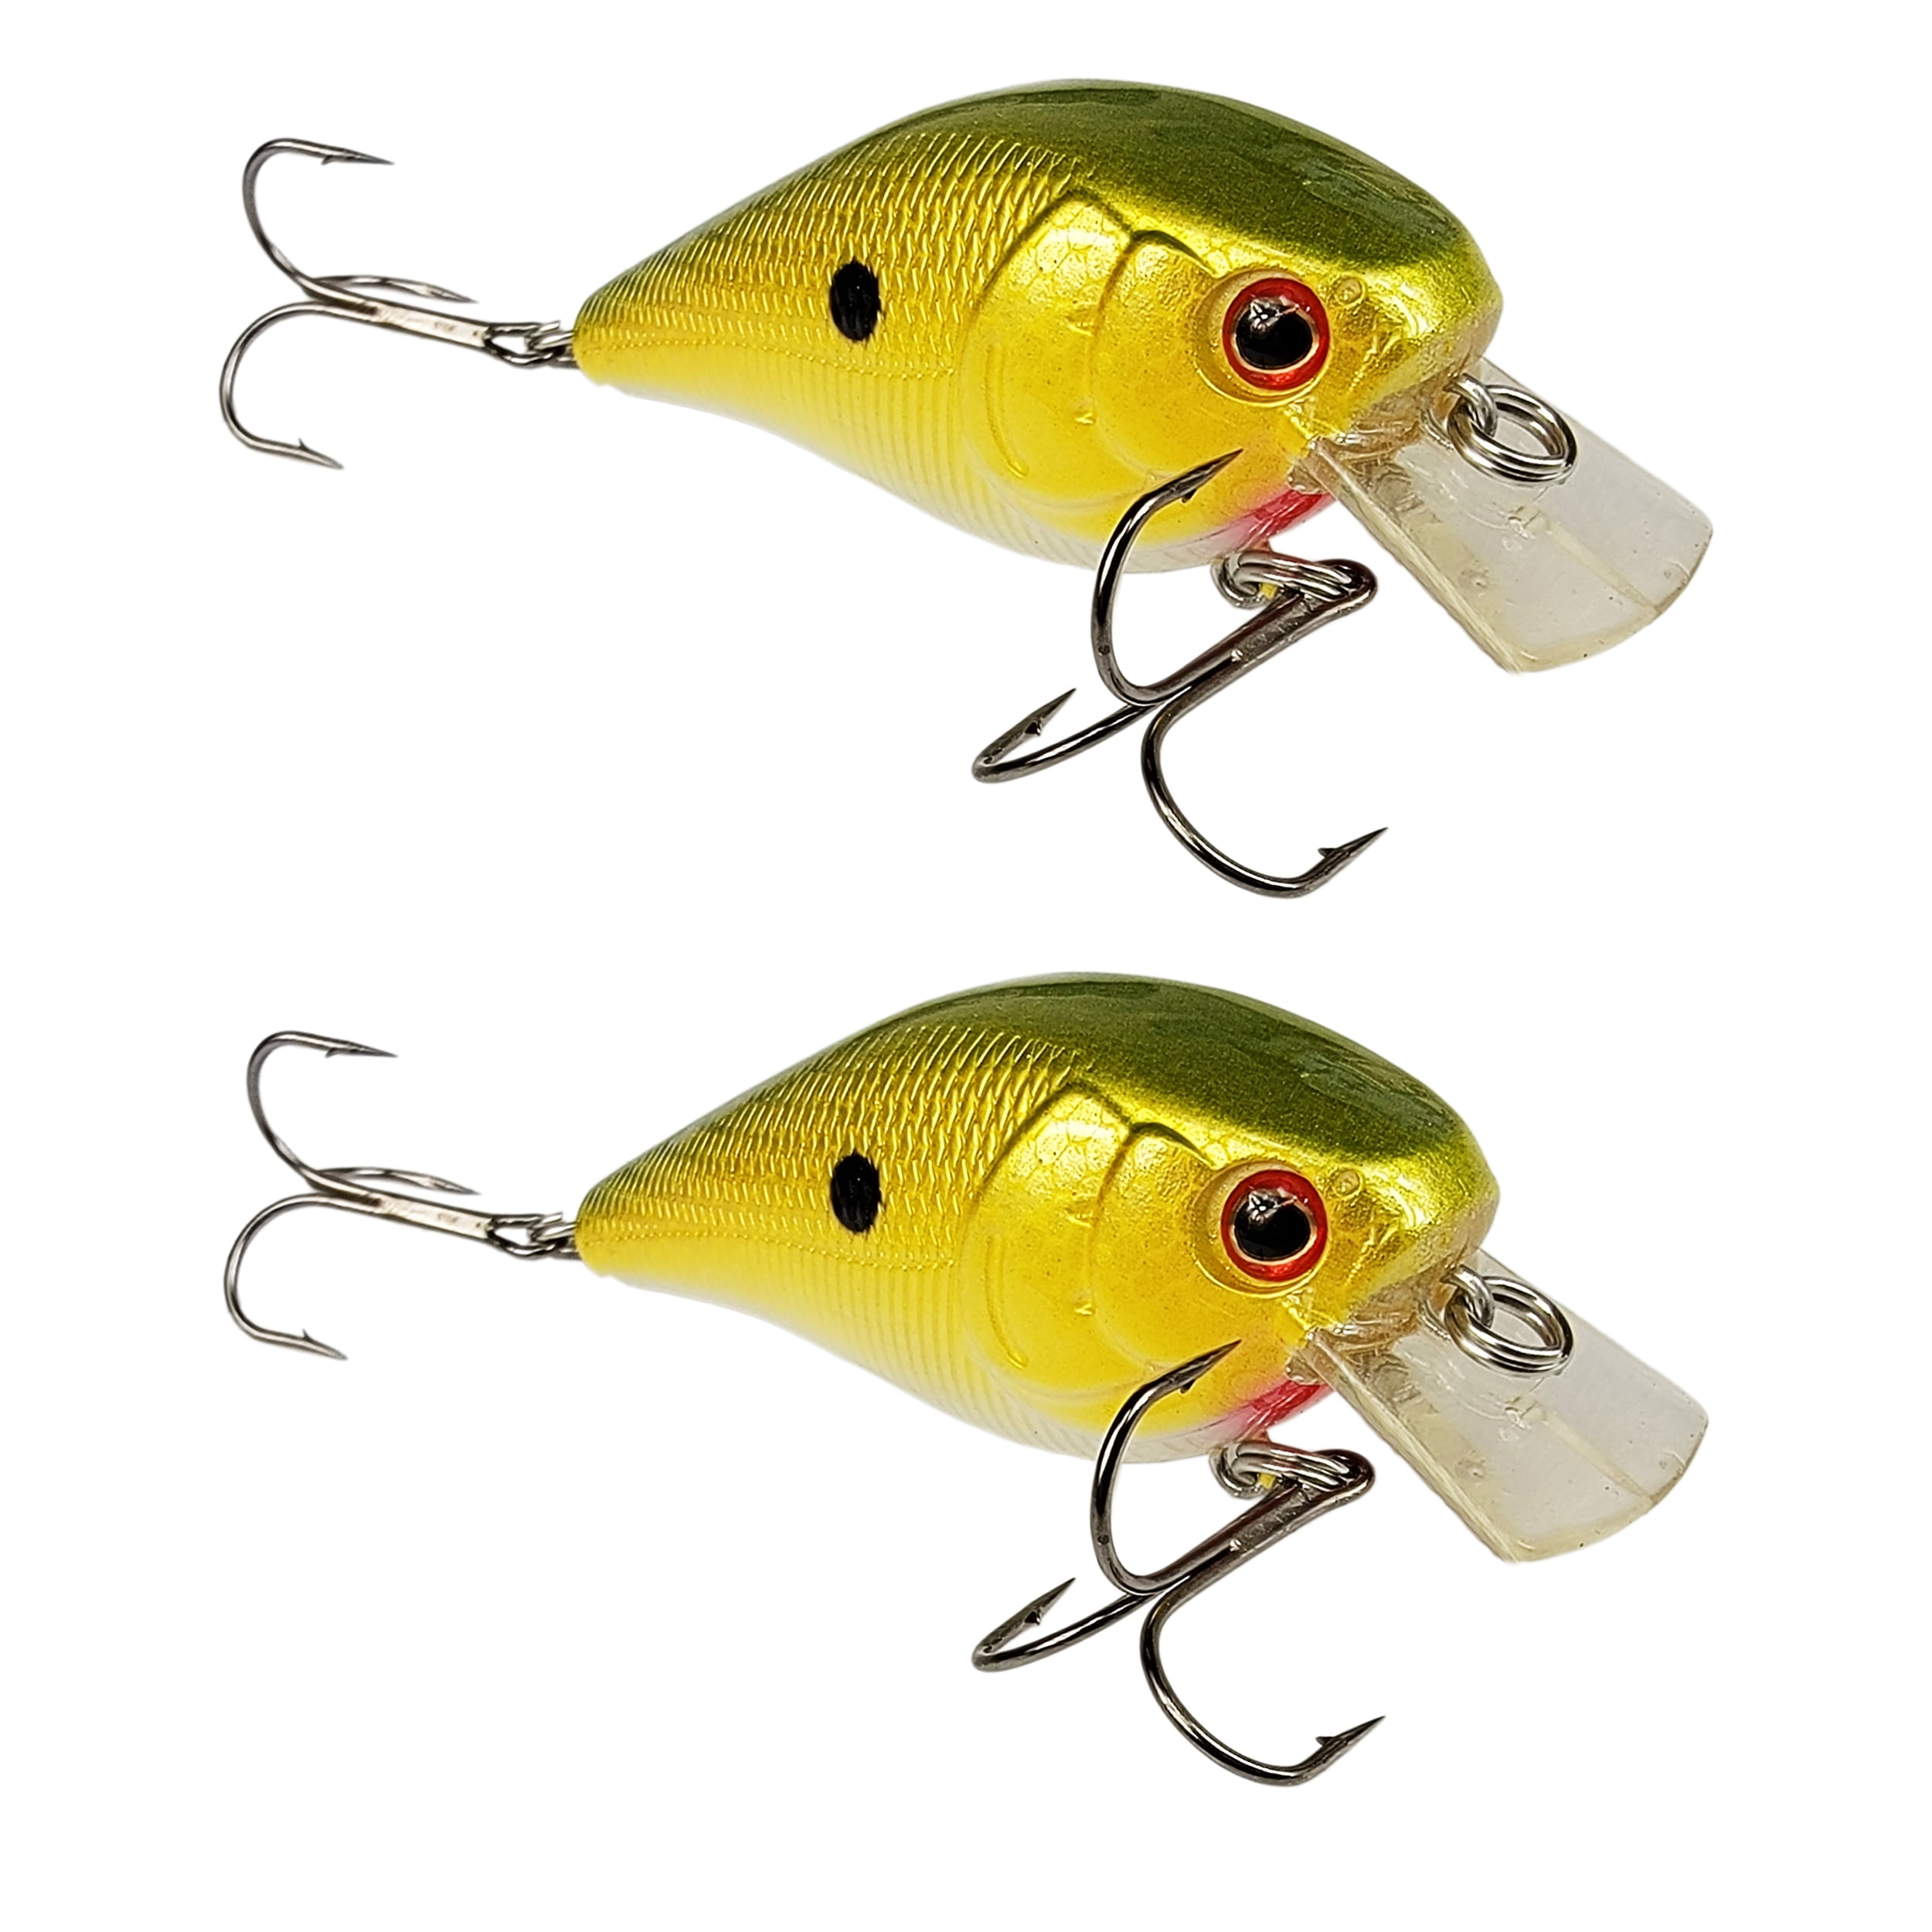 Tackle HD 2-Pack Square Bill Crankbait, 2.75 Lipped Rattle Crankbaits with  Fishing Hooks, Top Water Fishing Lures for Crappie, Walleye, Perch, or Bass  Fishing, Chartreuse Shad 